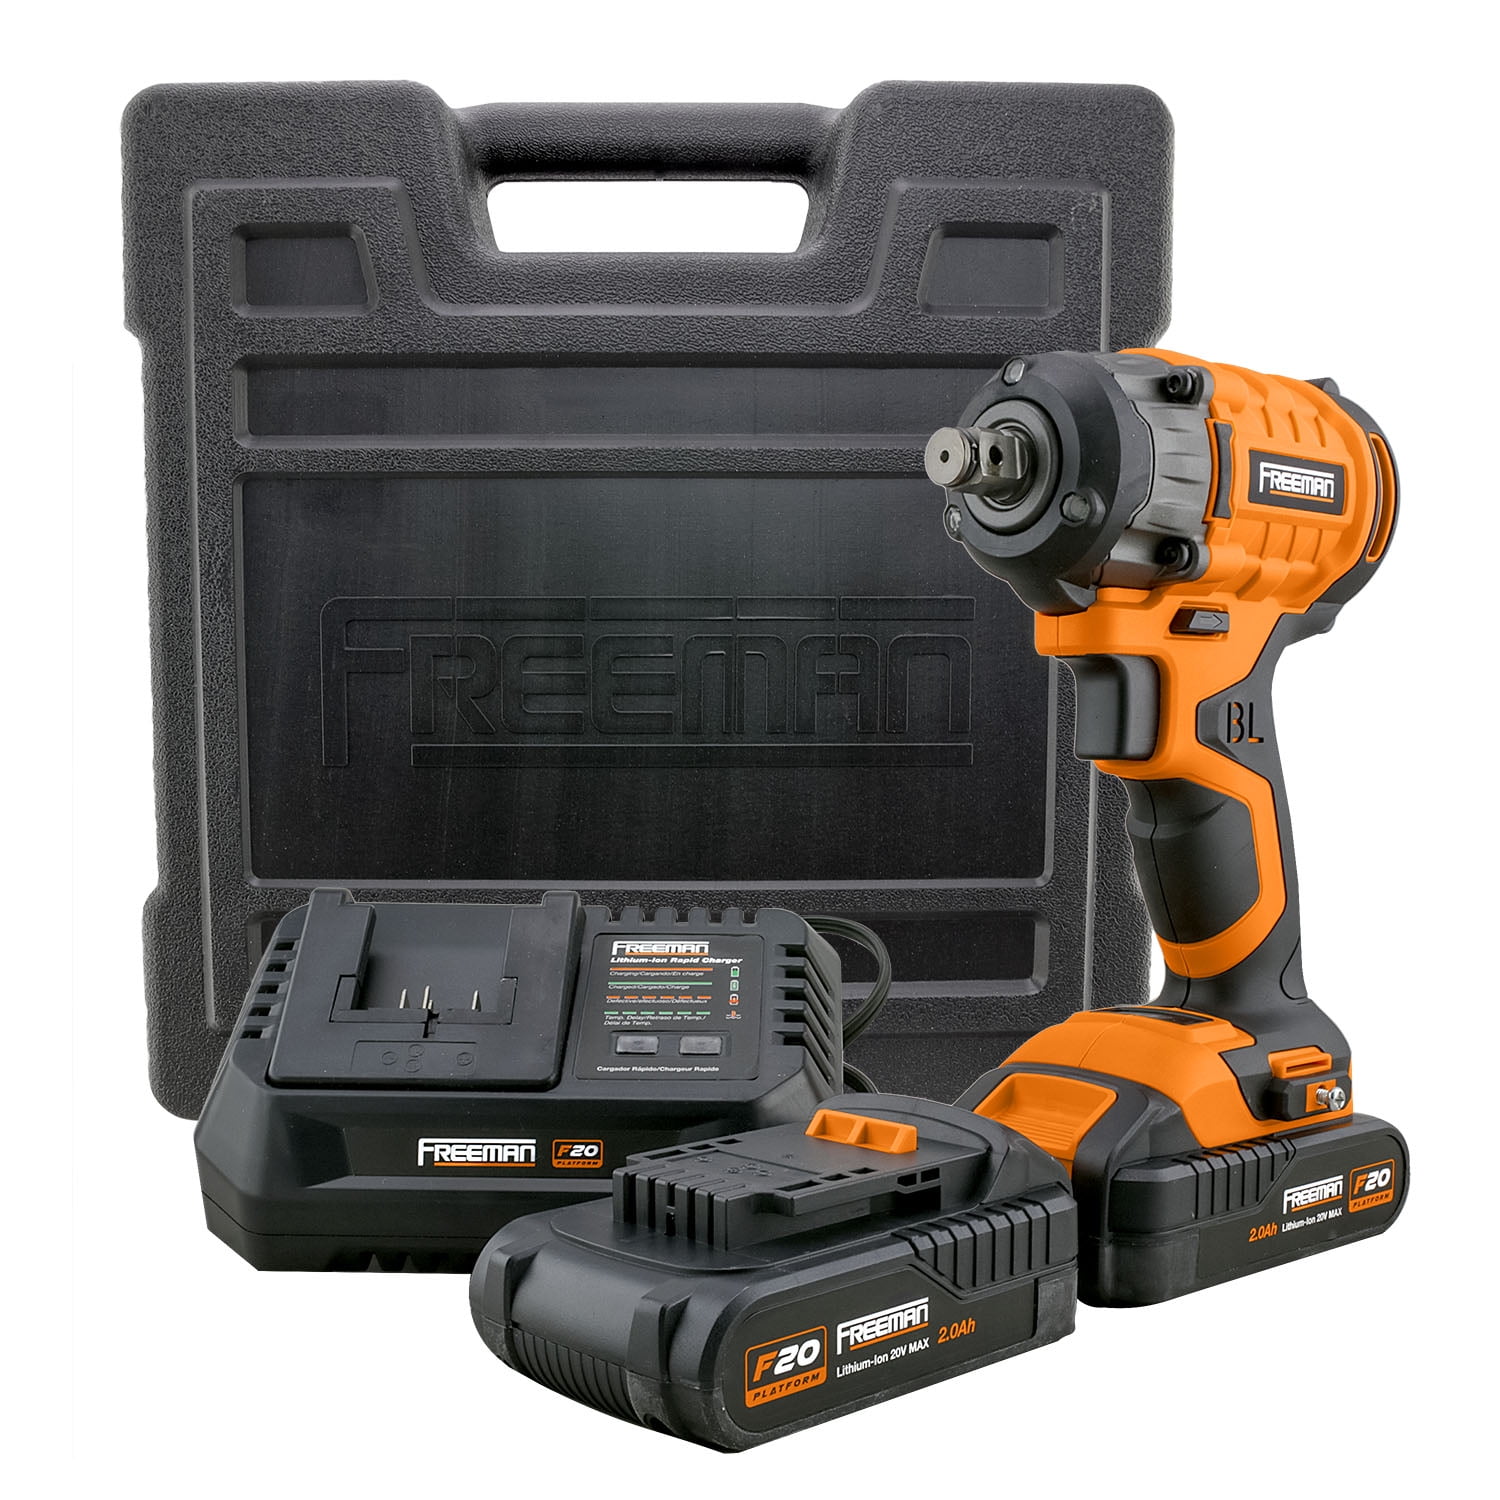 Tradespro 837212 24-volt 1/2" Drive Cordless Impact Wrench Kit 